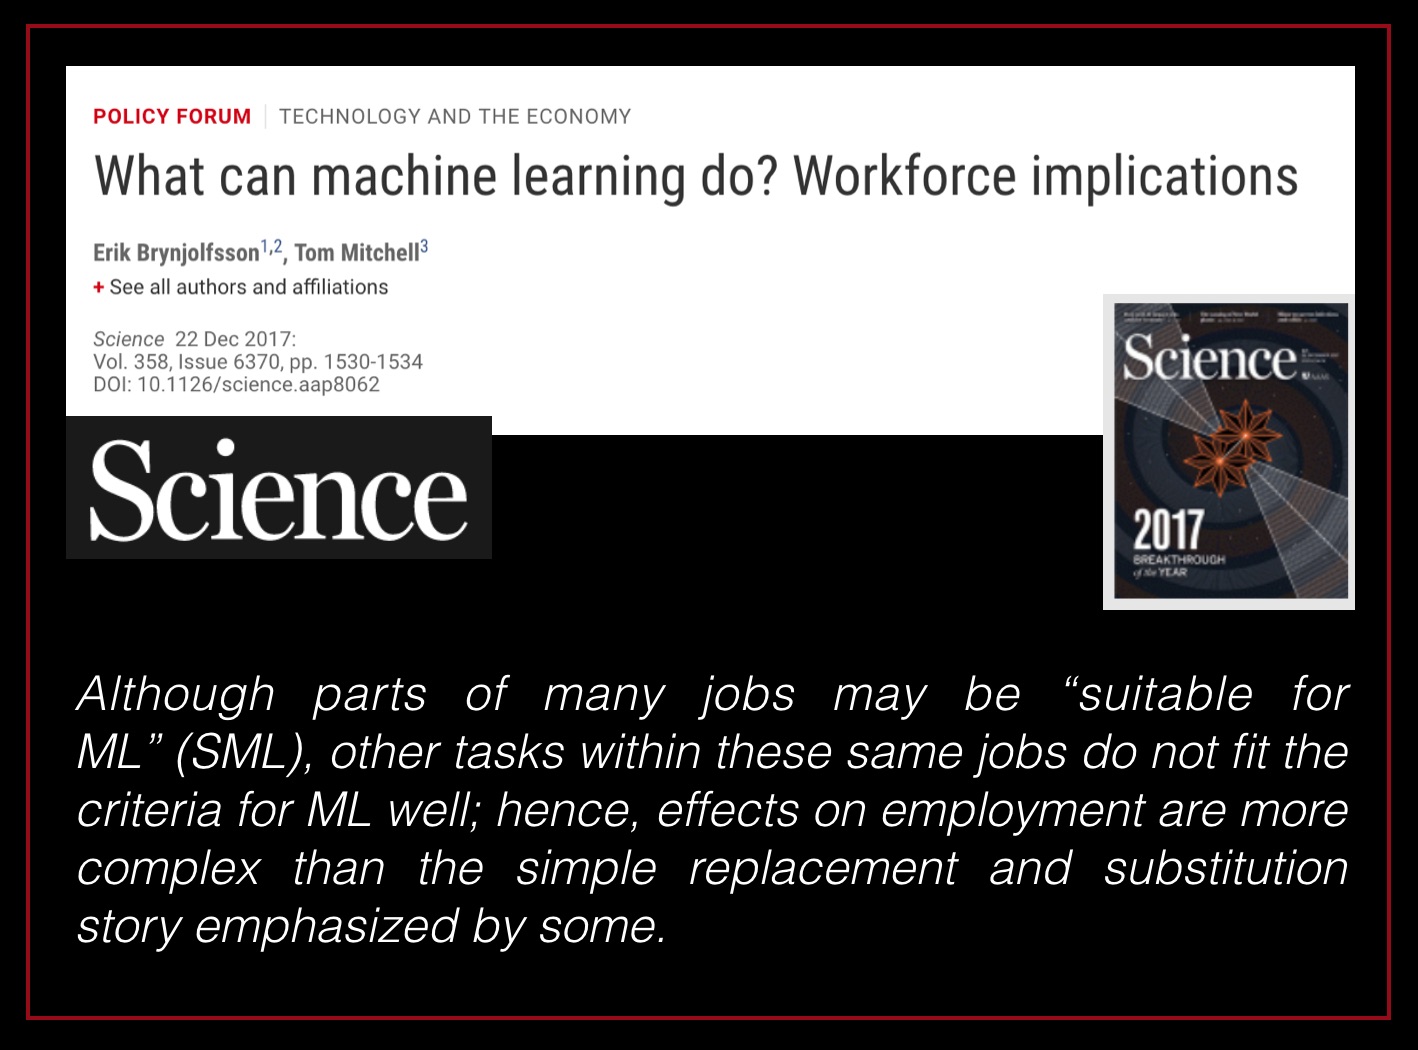 What can machine learning do? Workforce implications